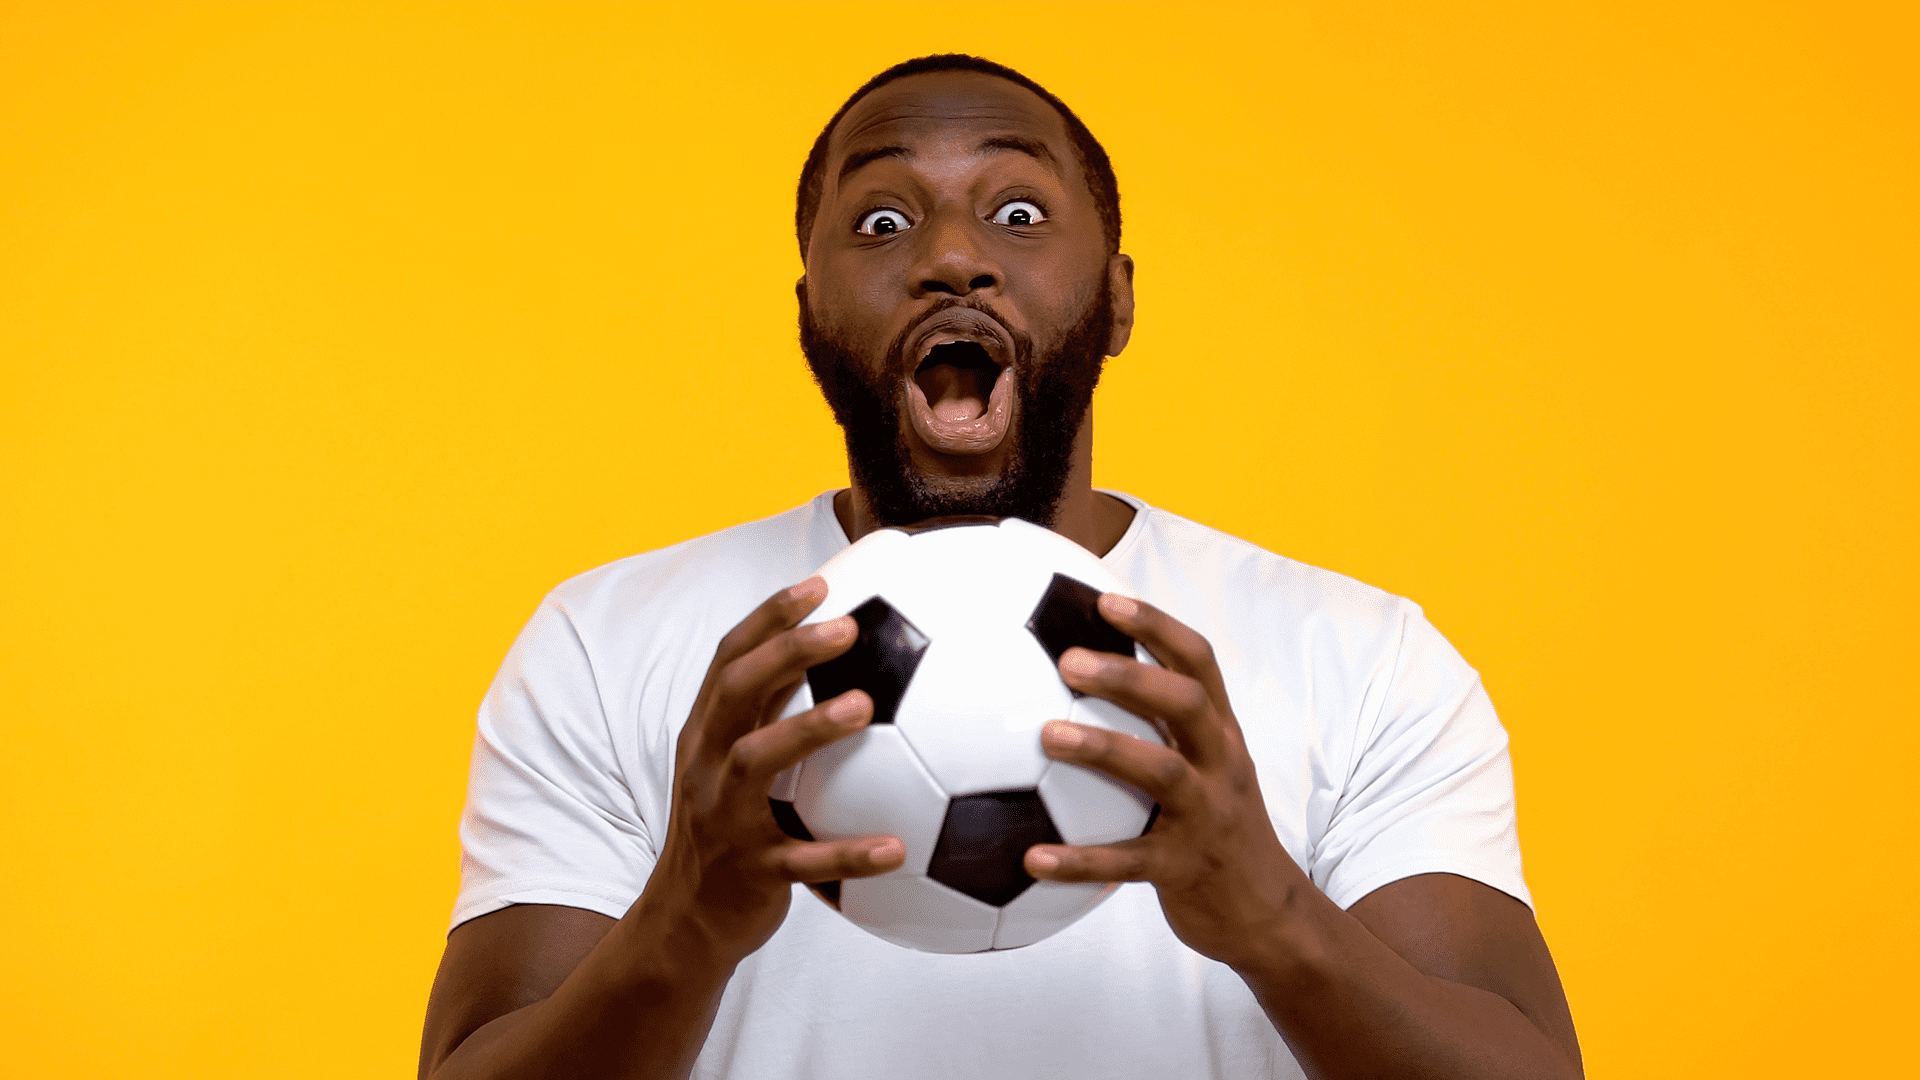 black person holding a soccer ball with yellow background